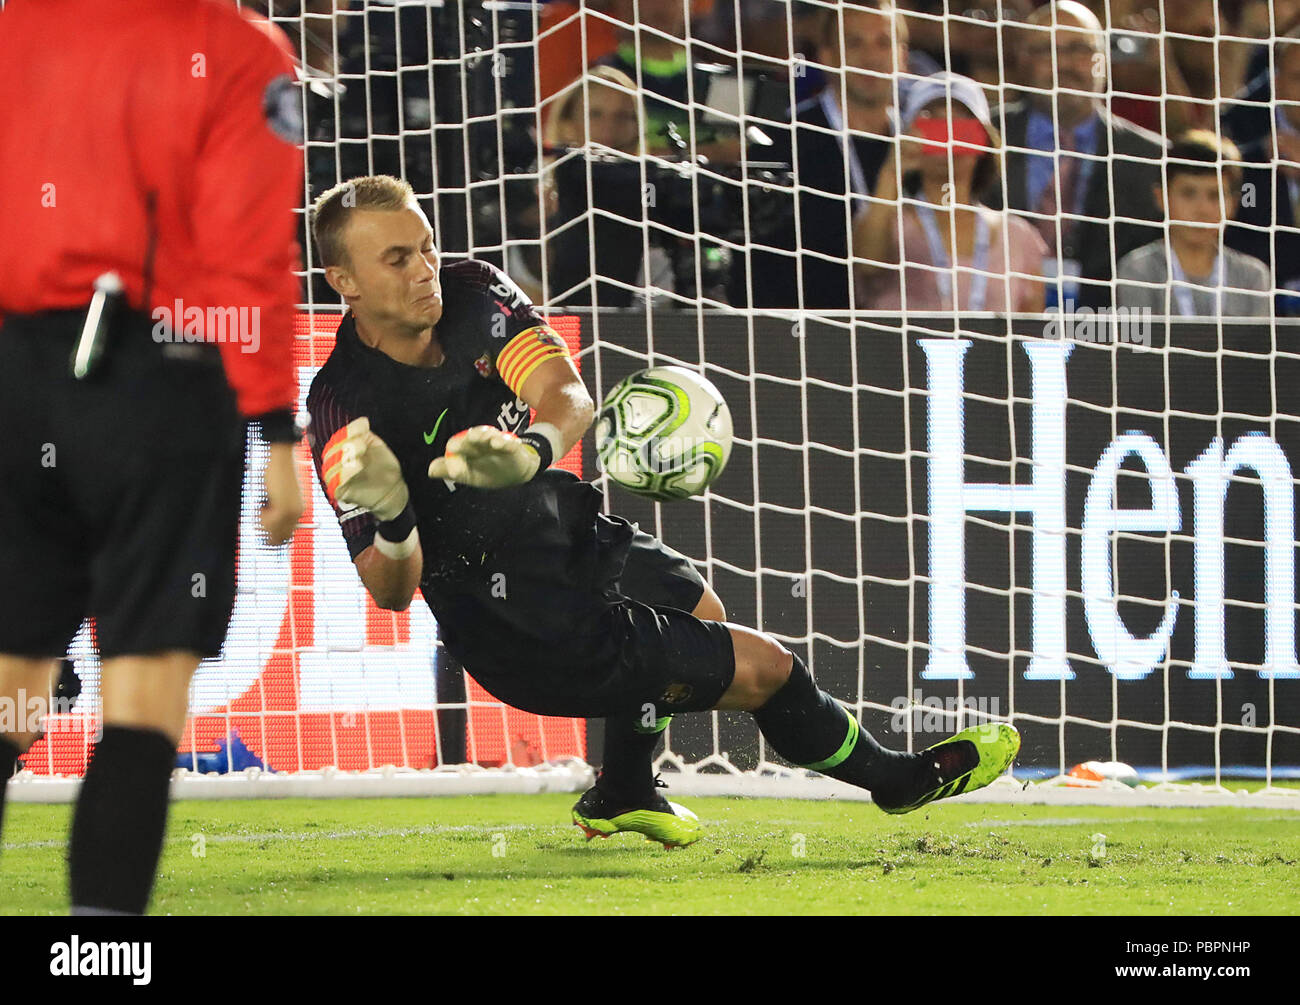 Pasadena, USA. 28th July, 2018. Barcelona's goalkeeper Jasper Cillessen (R) blocks during the International Champions Cup soccer match between Barcelona and Tottenham Hotspur in Pasadena, the United States, July 28, 2018. Barcelona won 7-5 (5-3 in penalty shootout). Credit: Li Ying/Xinhua/Alamy Live News Stock Photo